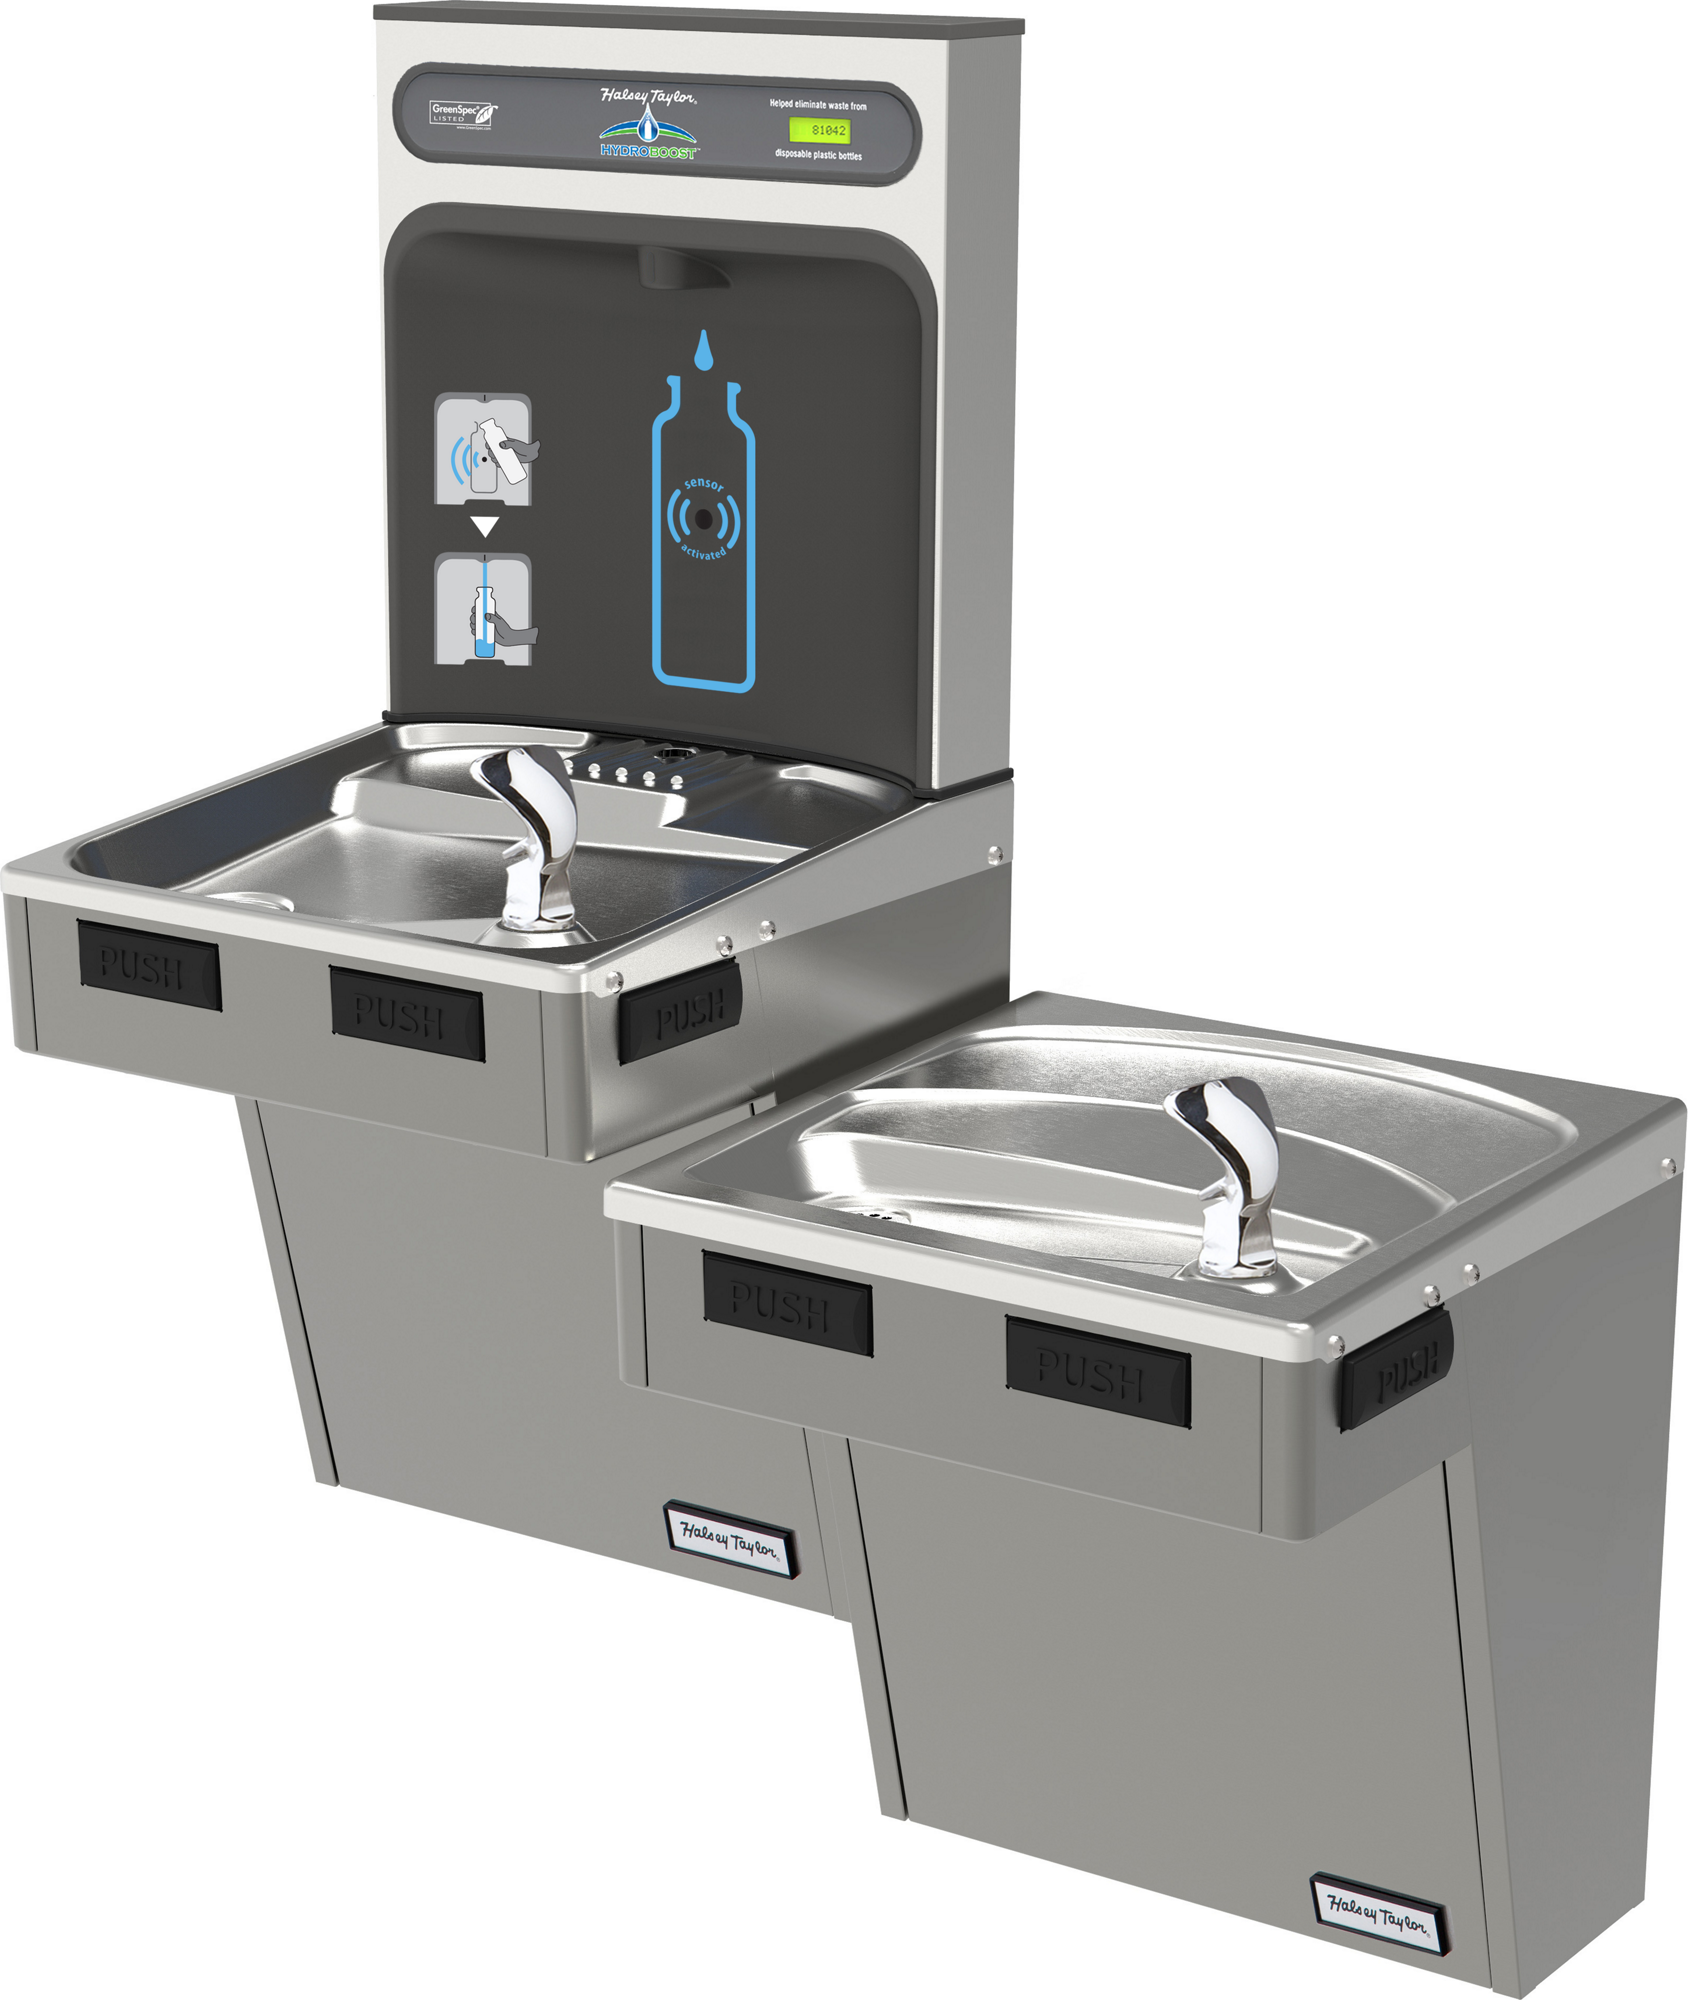 Halsey Taylor HTHB-HACG8BLPV-NF | Wall-mounted Bi-Level Bottle Filling Station | Filterless, High-efficiency chiller, HAC-style fountains, Platinum Vinyl color finish